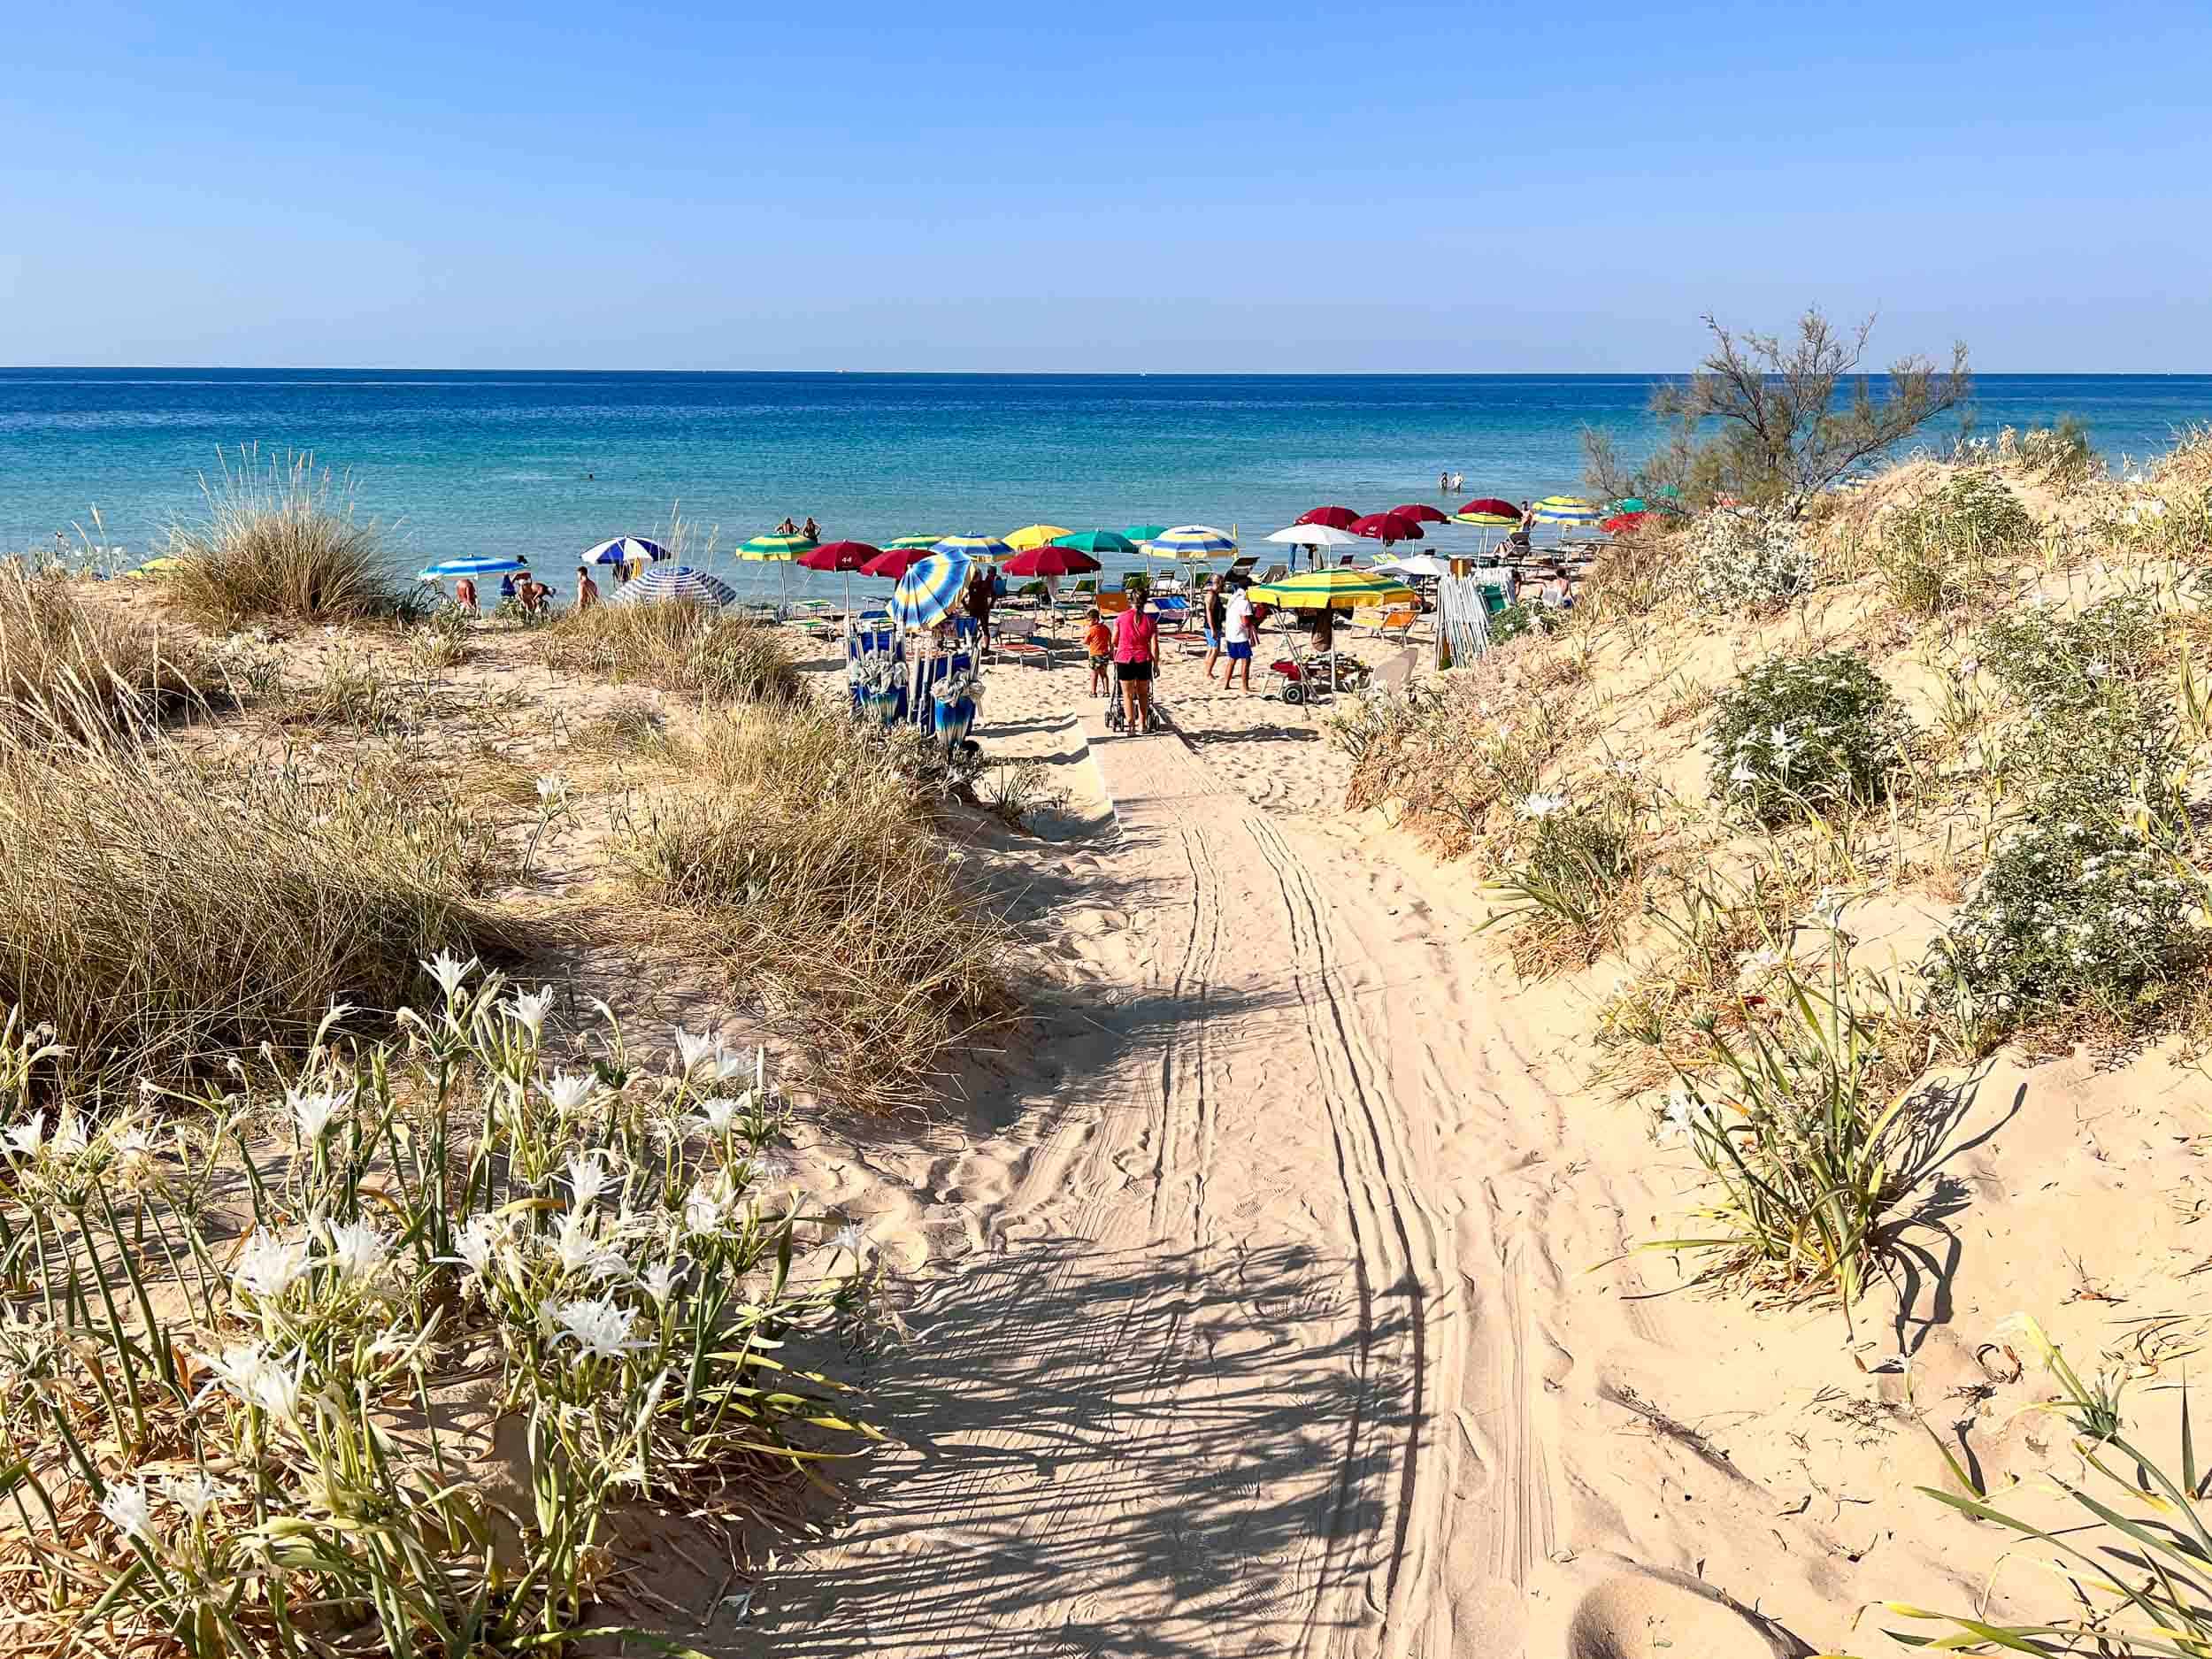 The sandy path through the dunes to Marina di Pescoluse, one of the best beaches in Puglia Italy.